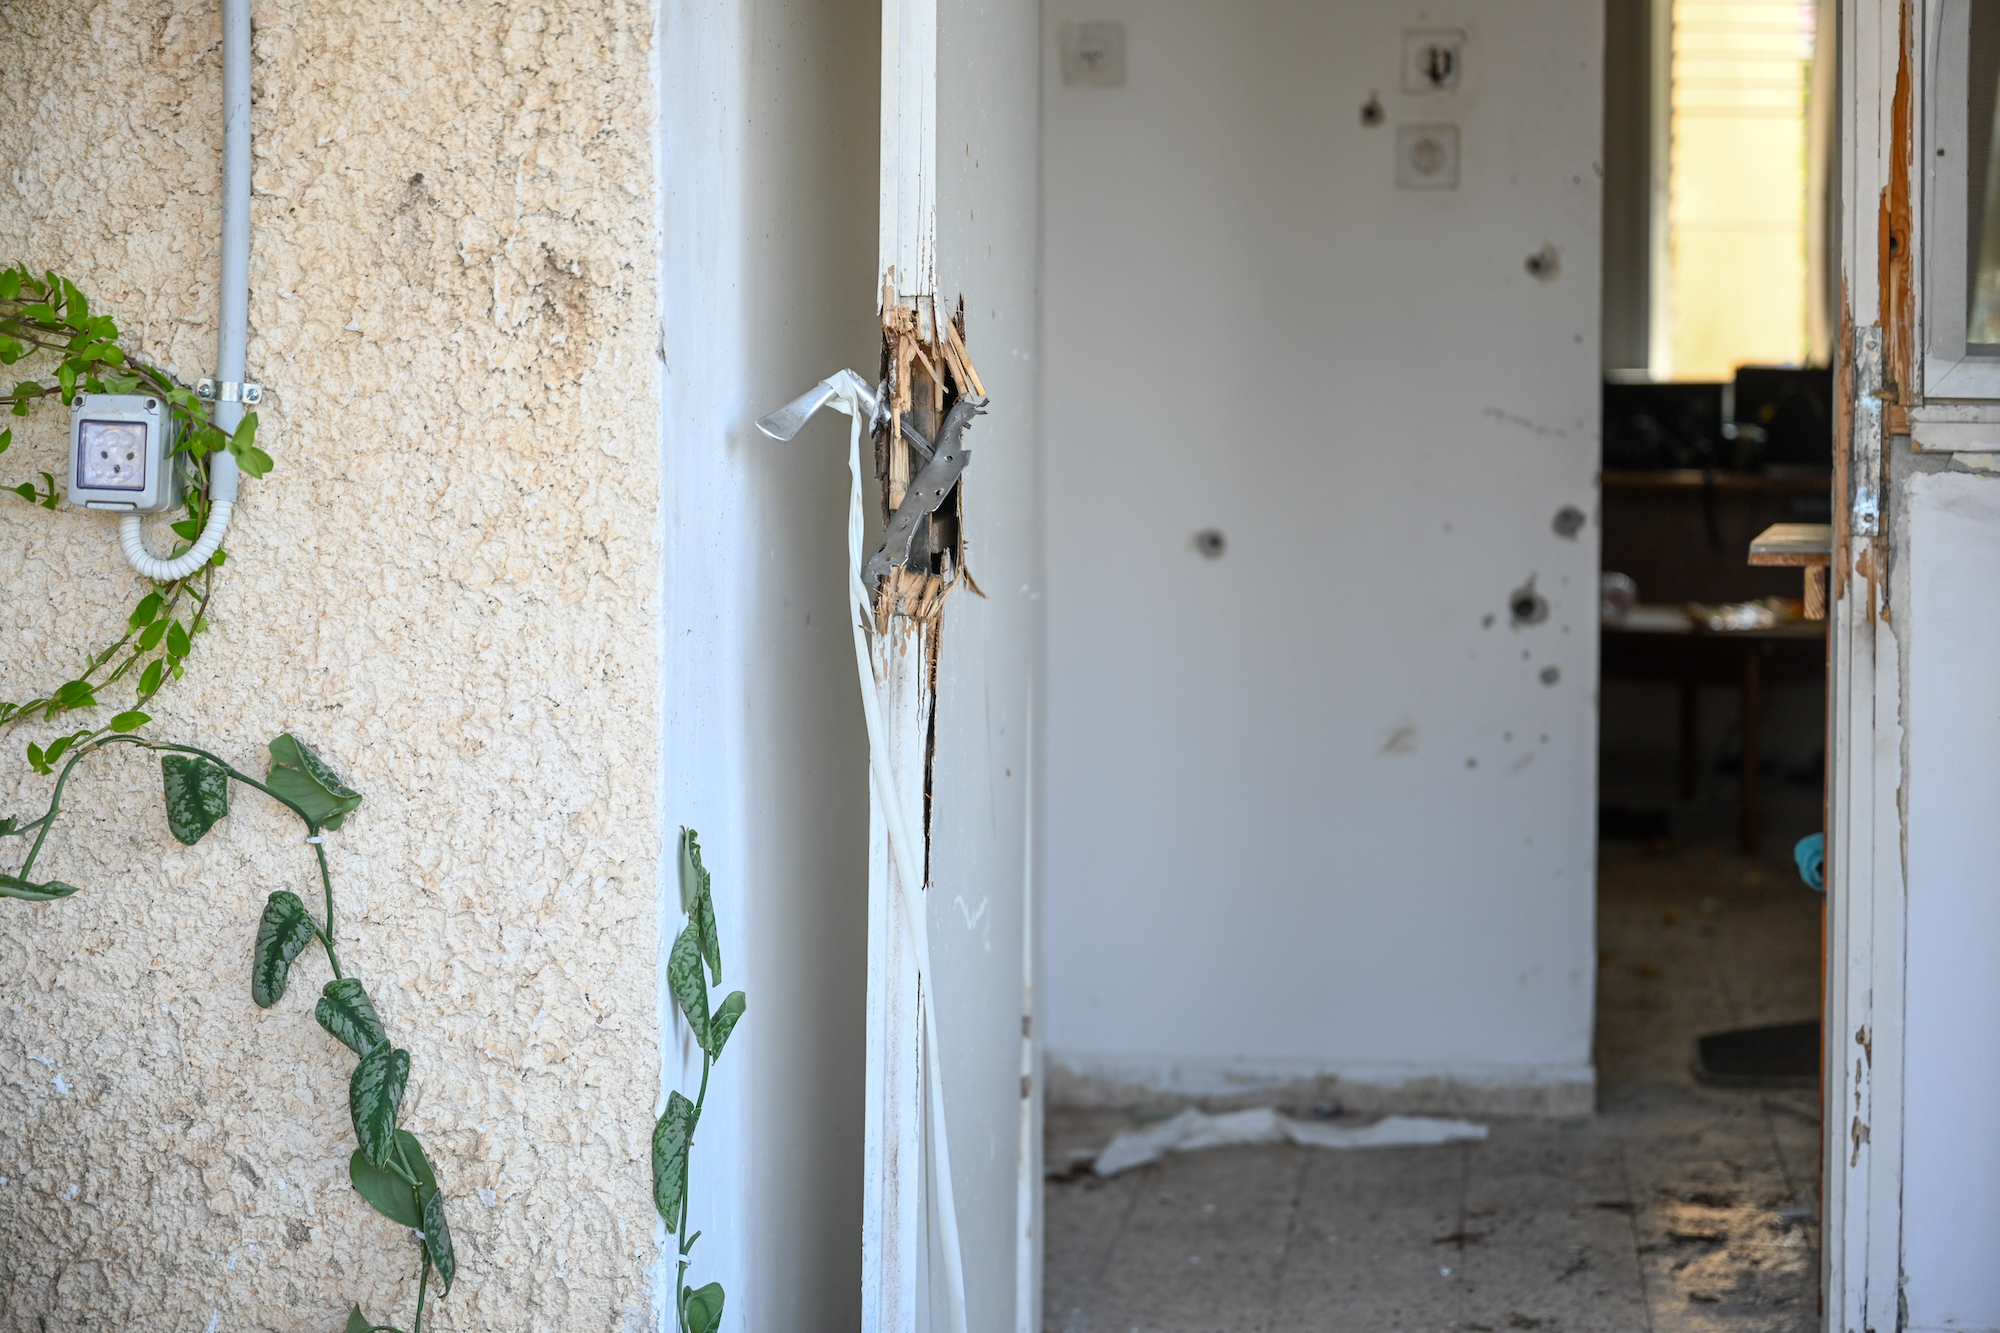 Bullet holes are seen on the walls of a house next to a broken door handle in Kfar Aza on Tuesday.